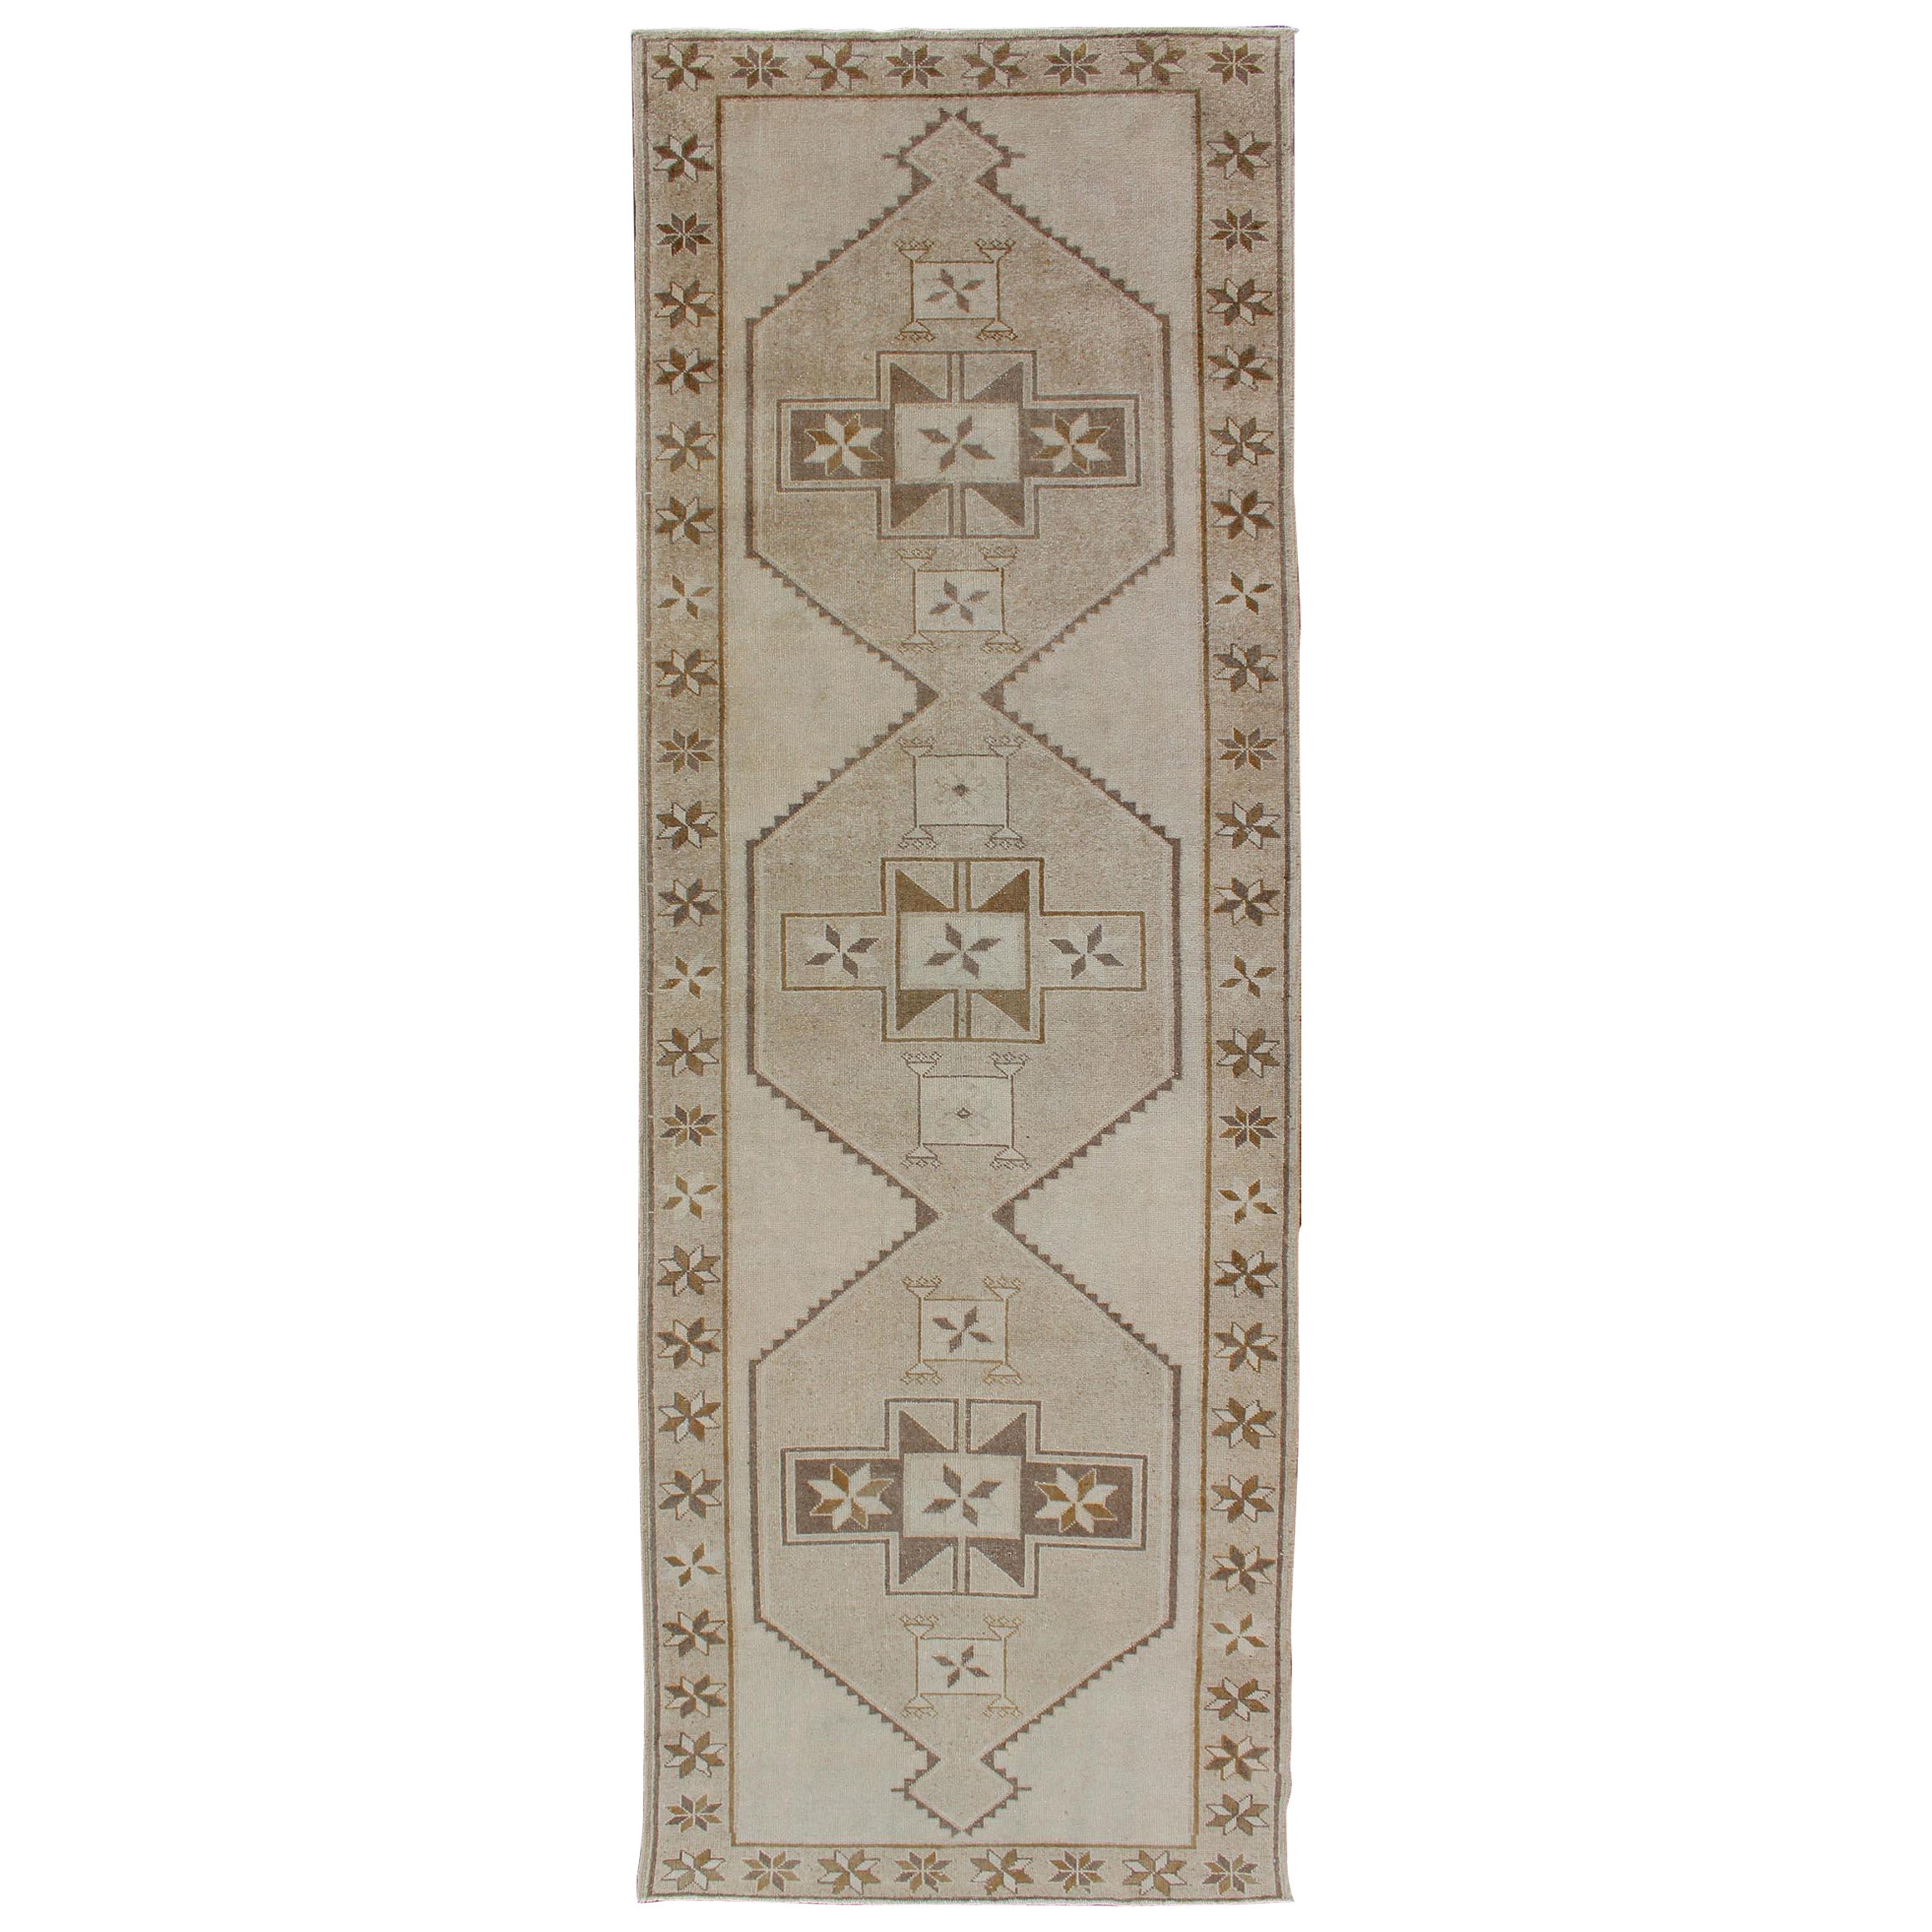 Light Gallery Vintage Oushak Runner with Geometric Medallions in Brown and Taupe